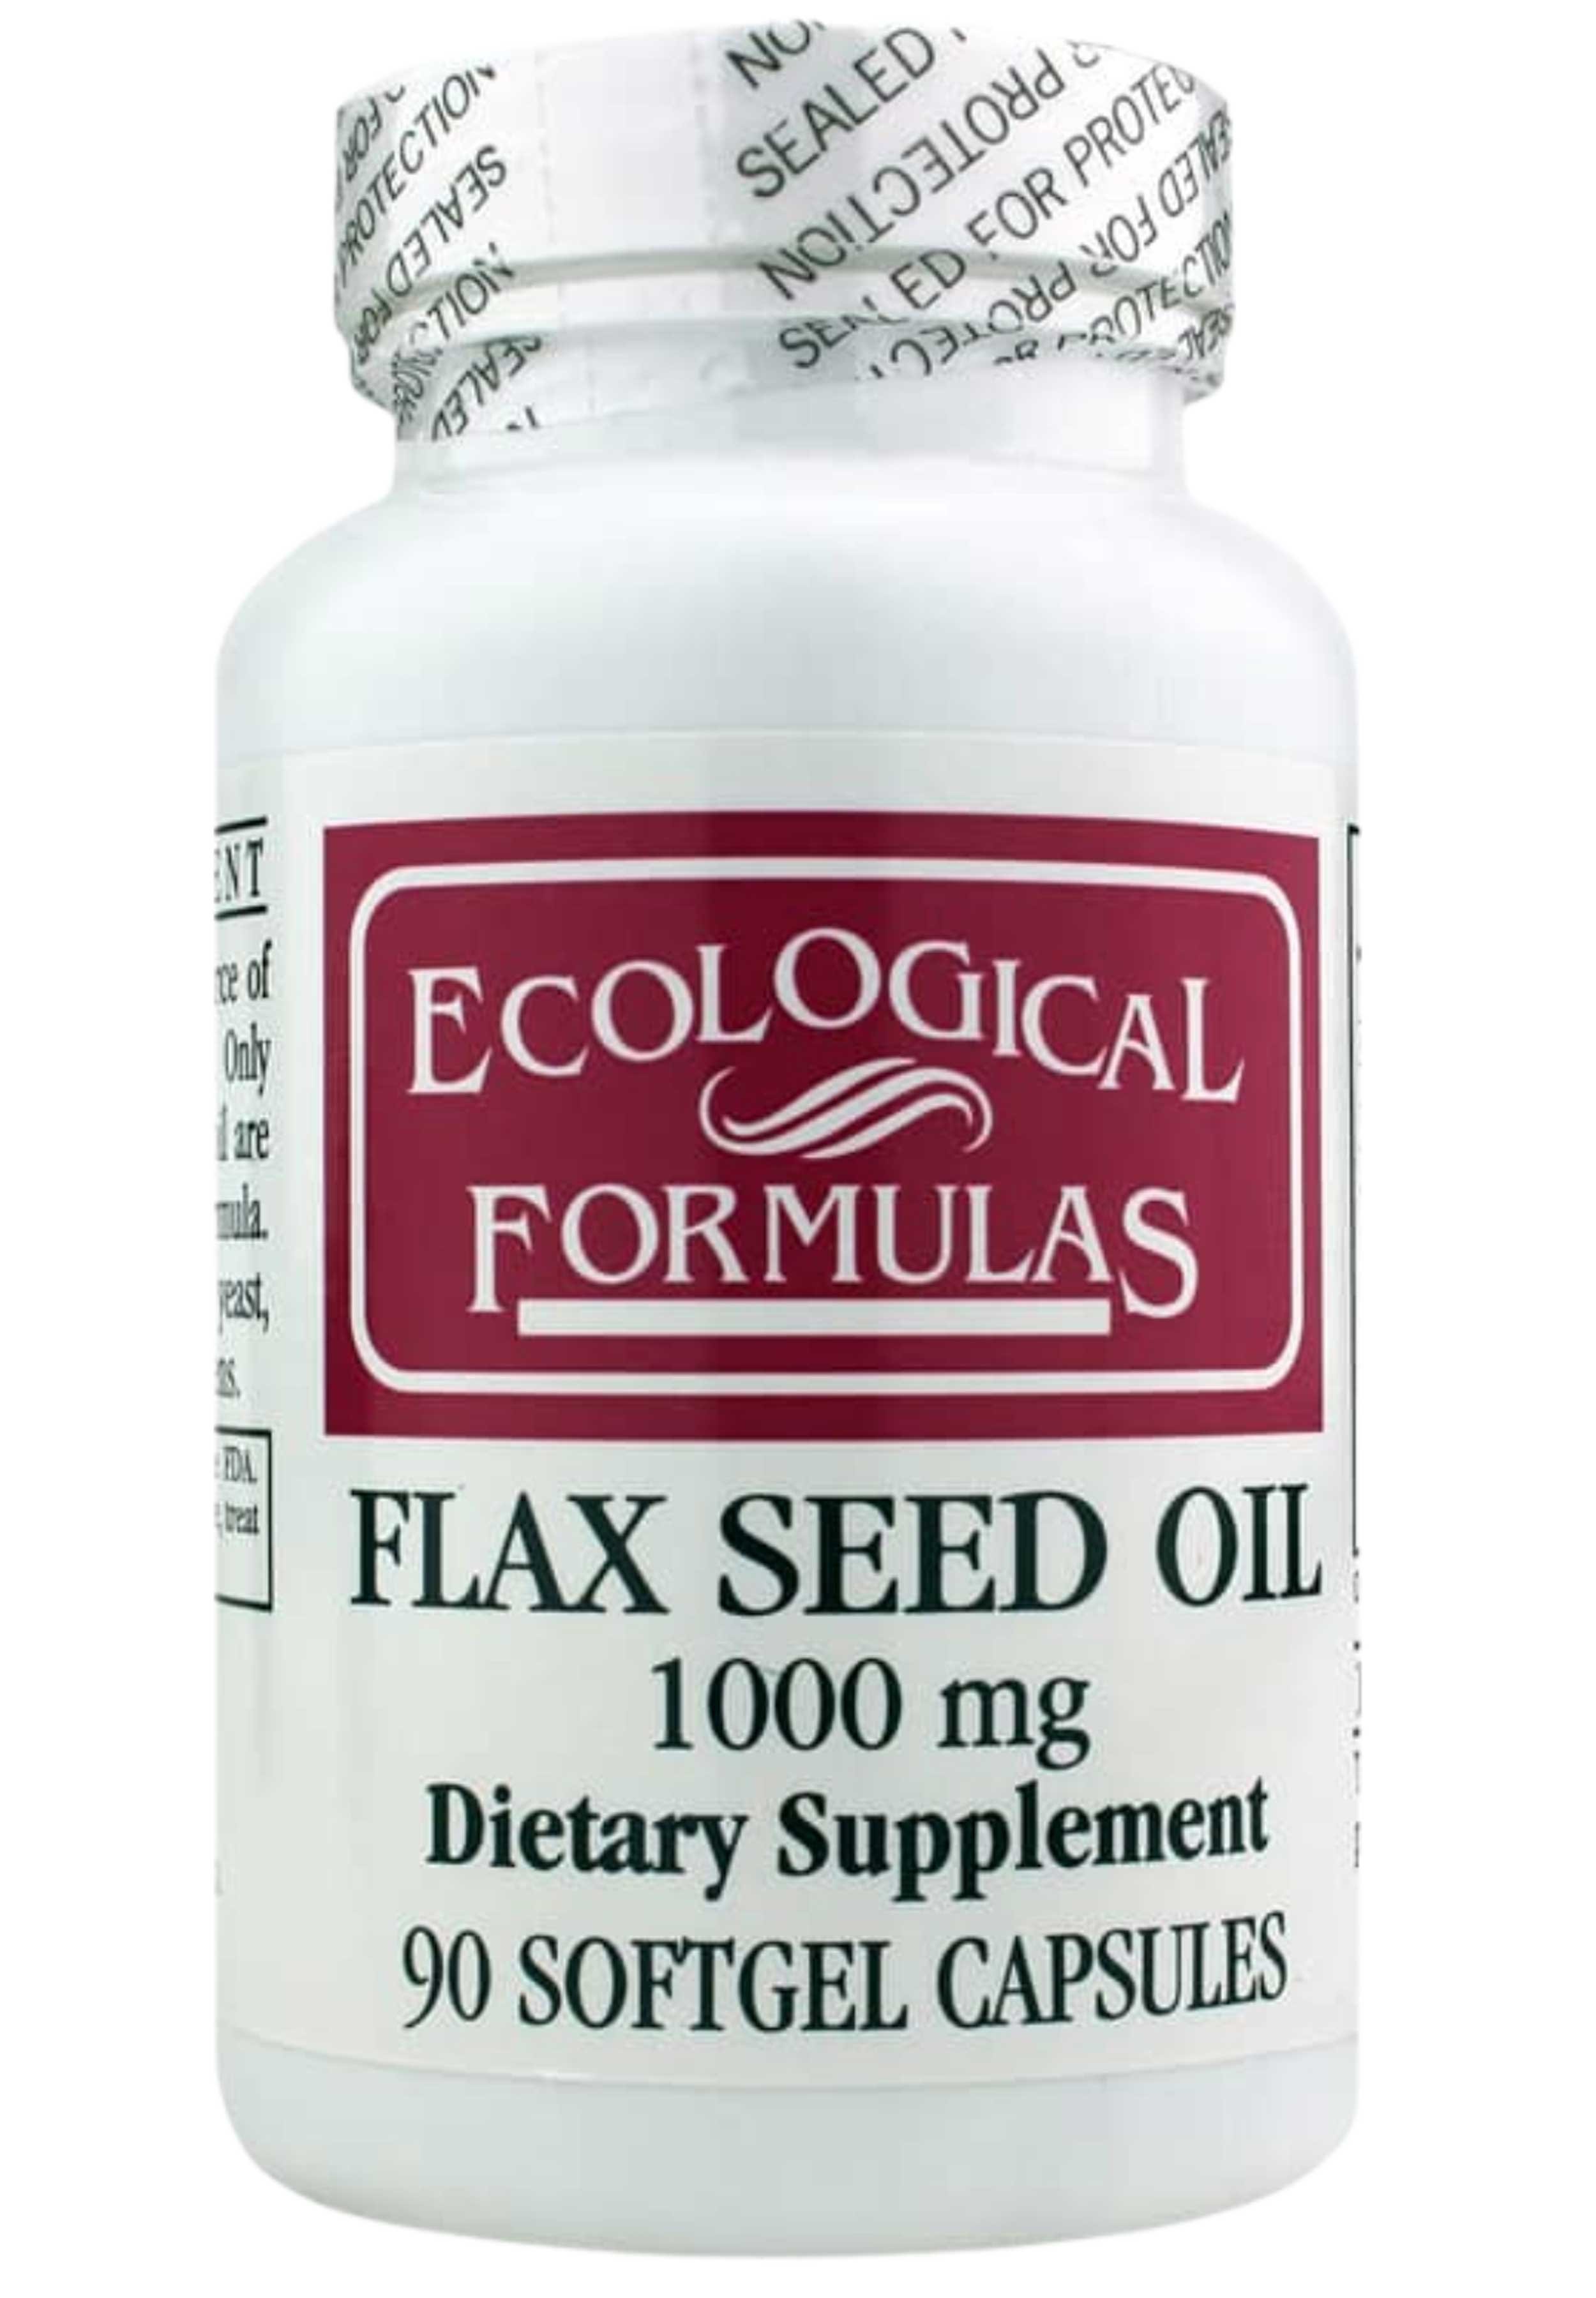 Ecological Formulas/Cardiovascular Research Flax Seed Oil 1000 mg